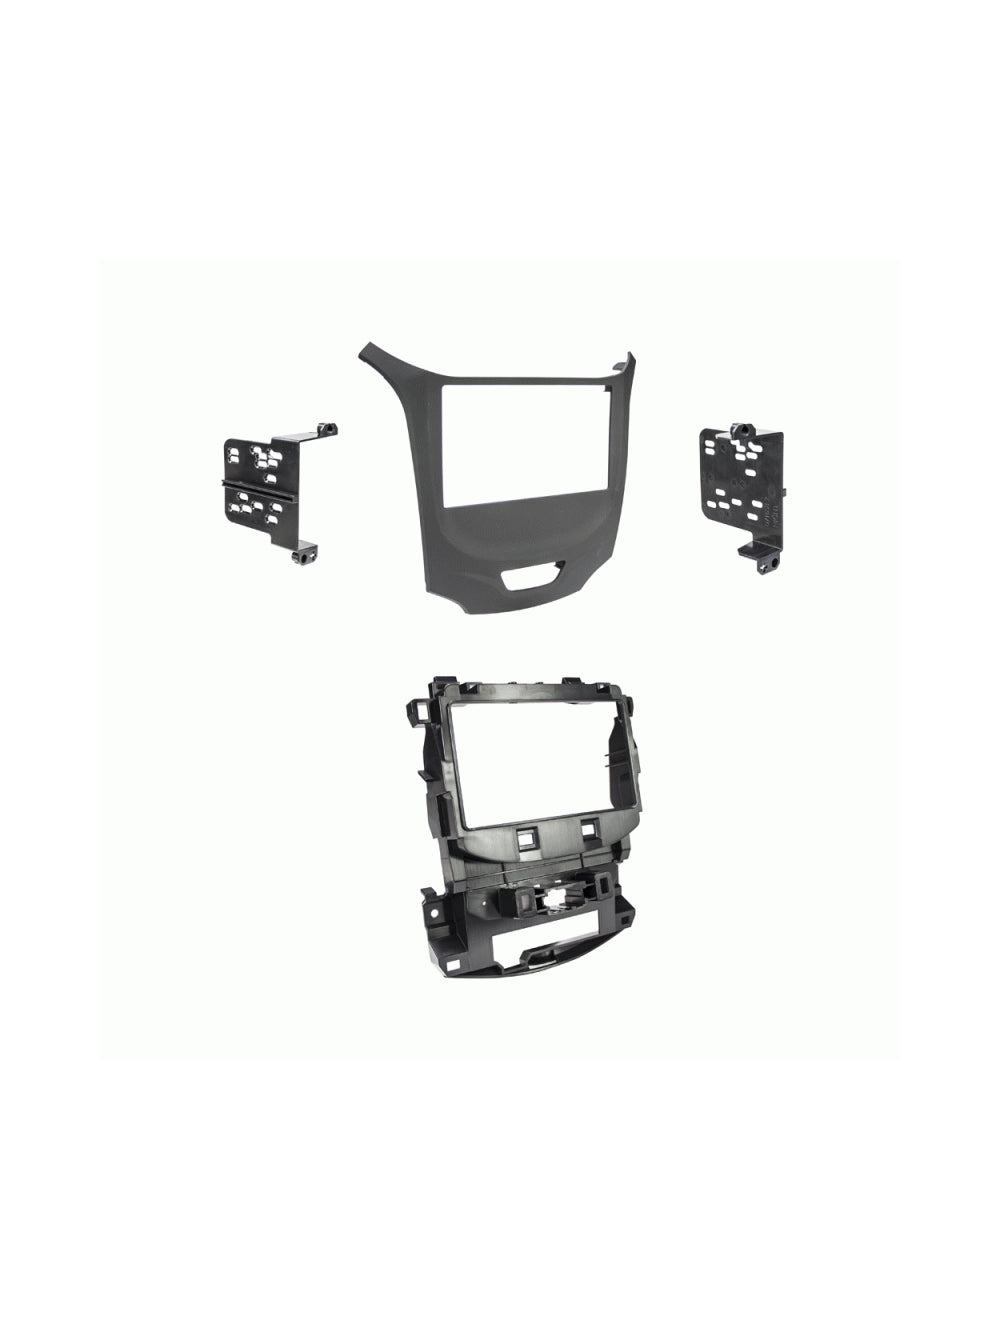 Metra 95-3020B Double DIN Dash Kit For 2016-Up Chevrolet Cruze